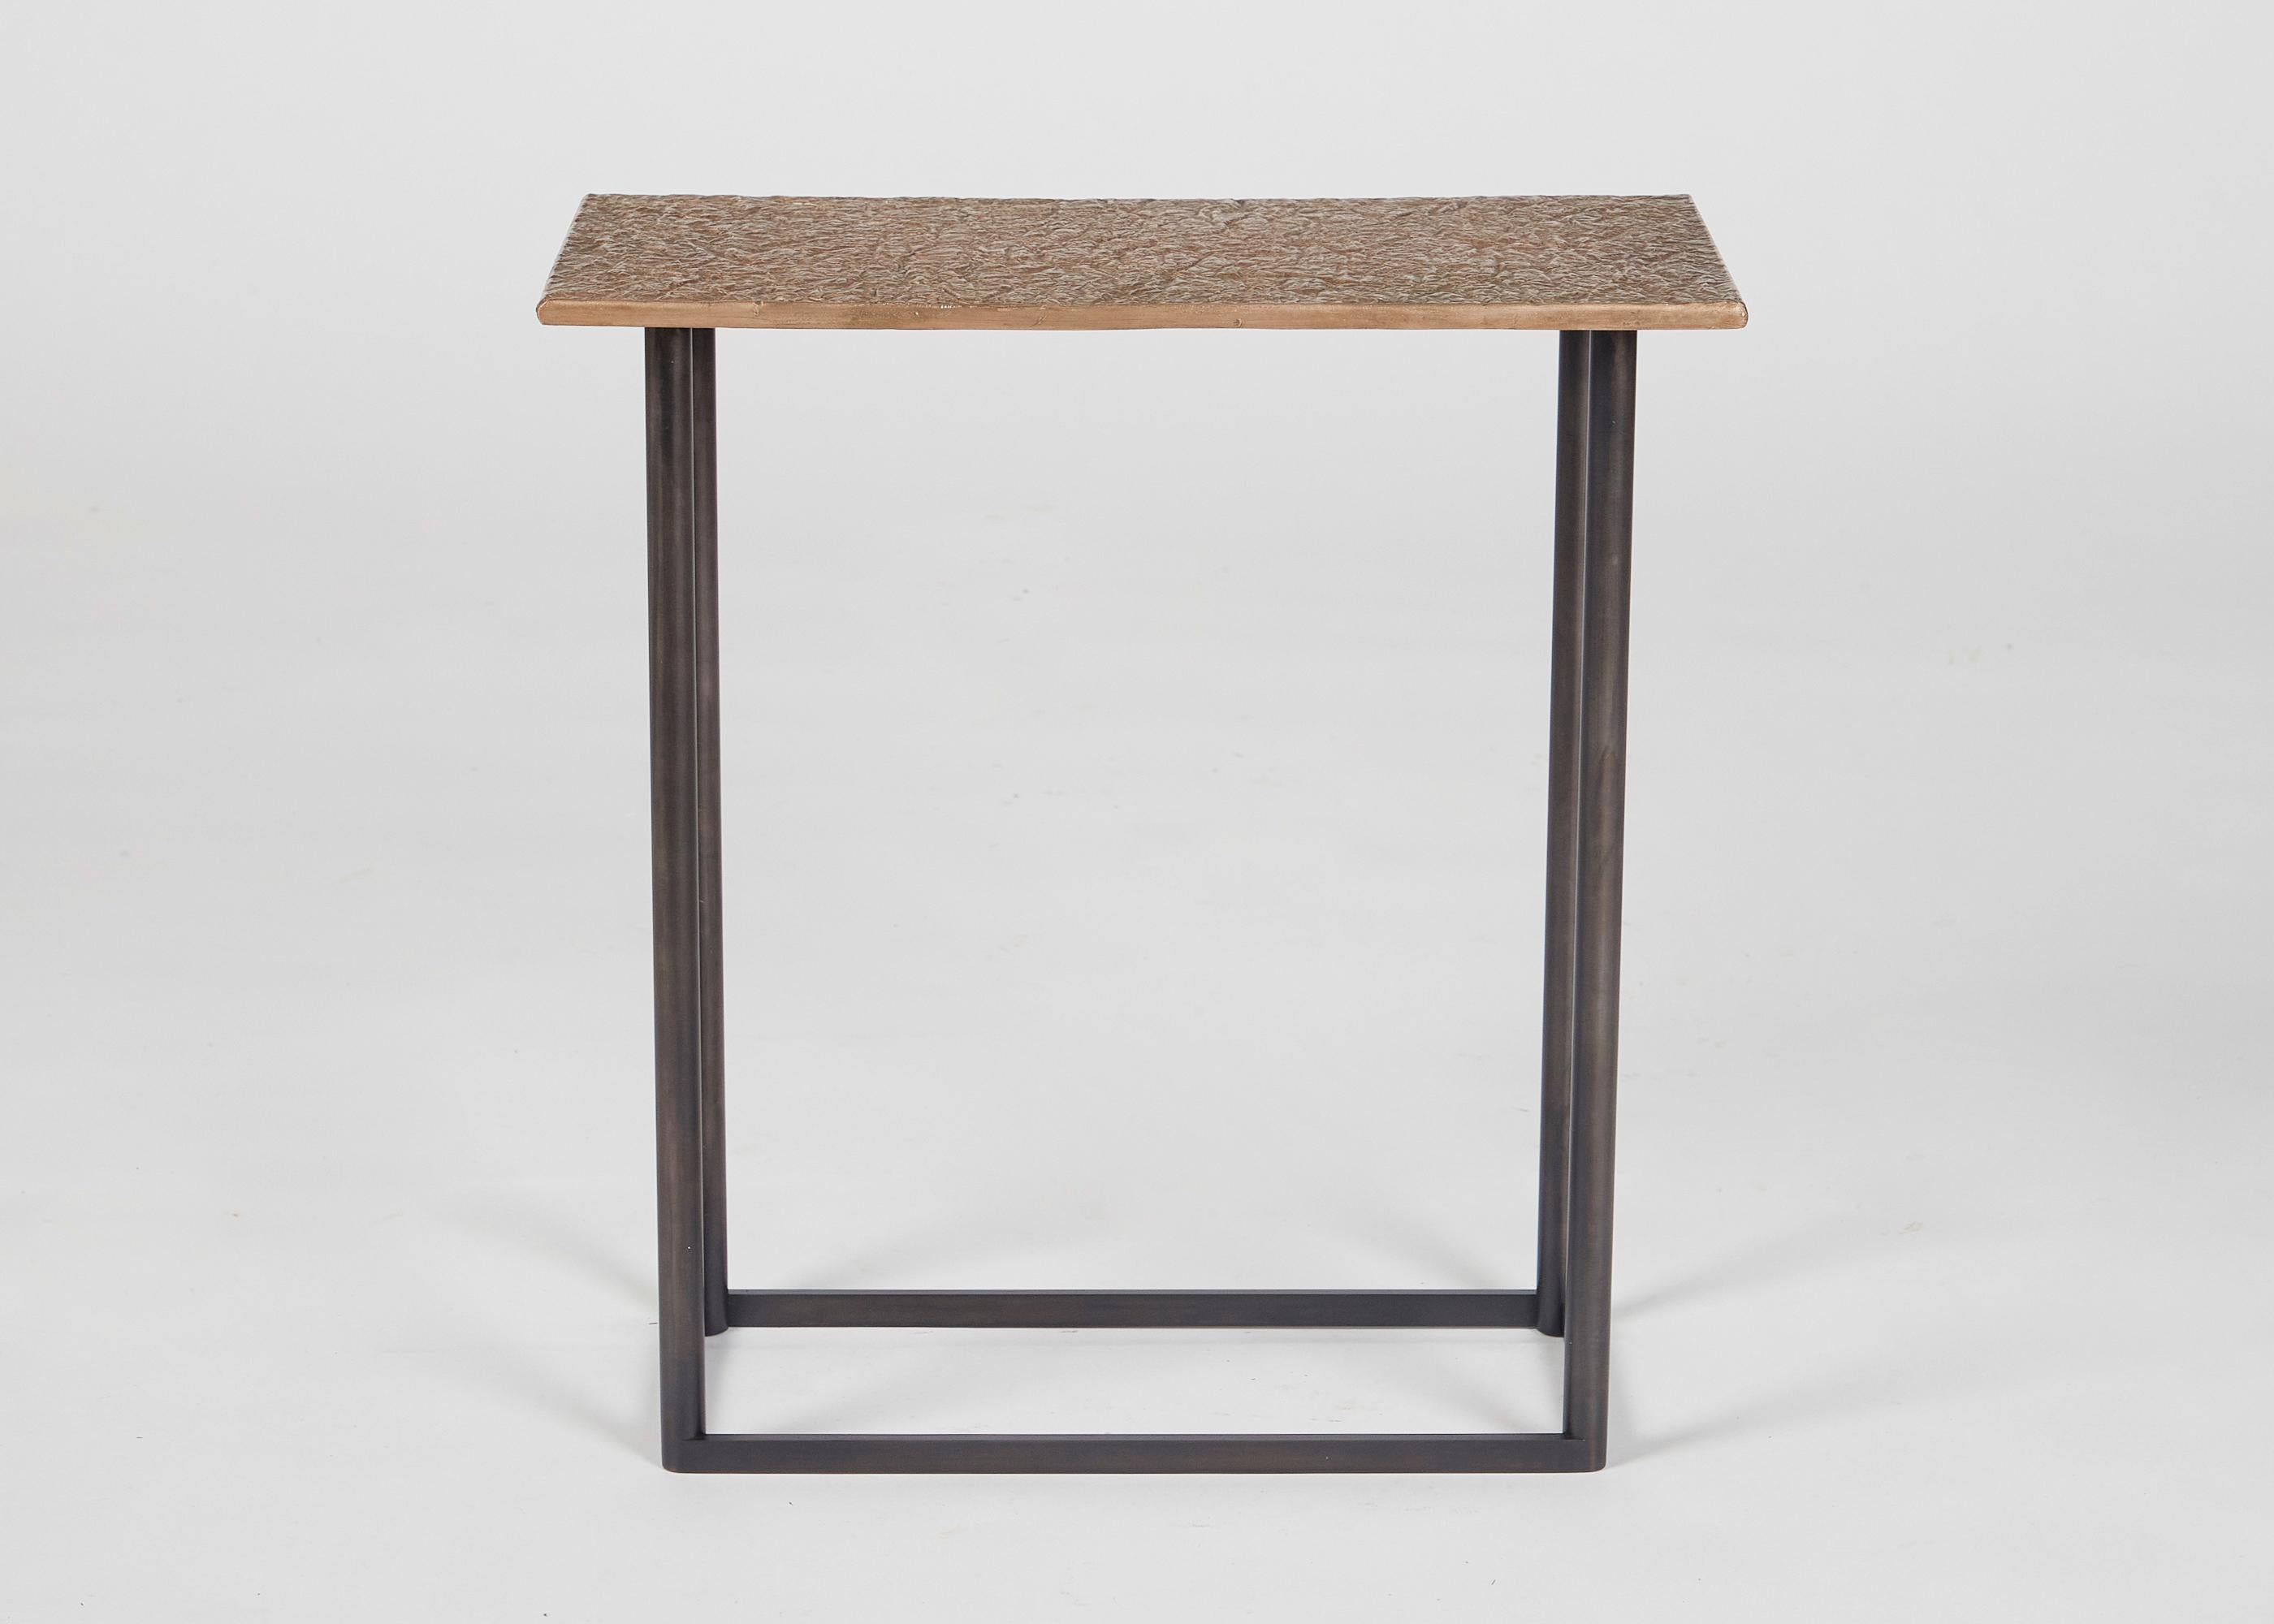 American Douglas Fanning, Geometry Series, Hillock Kulle, Cocktail Table, US, 2020 For Sale